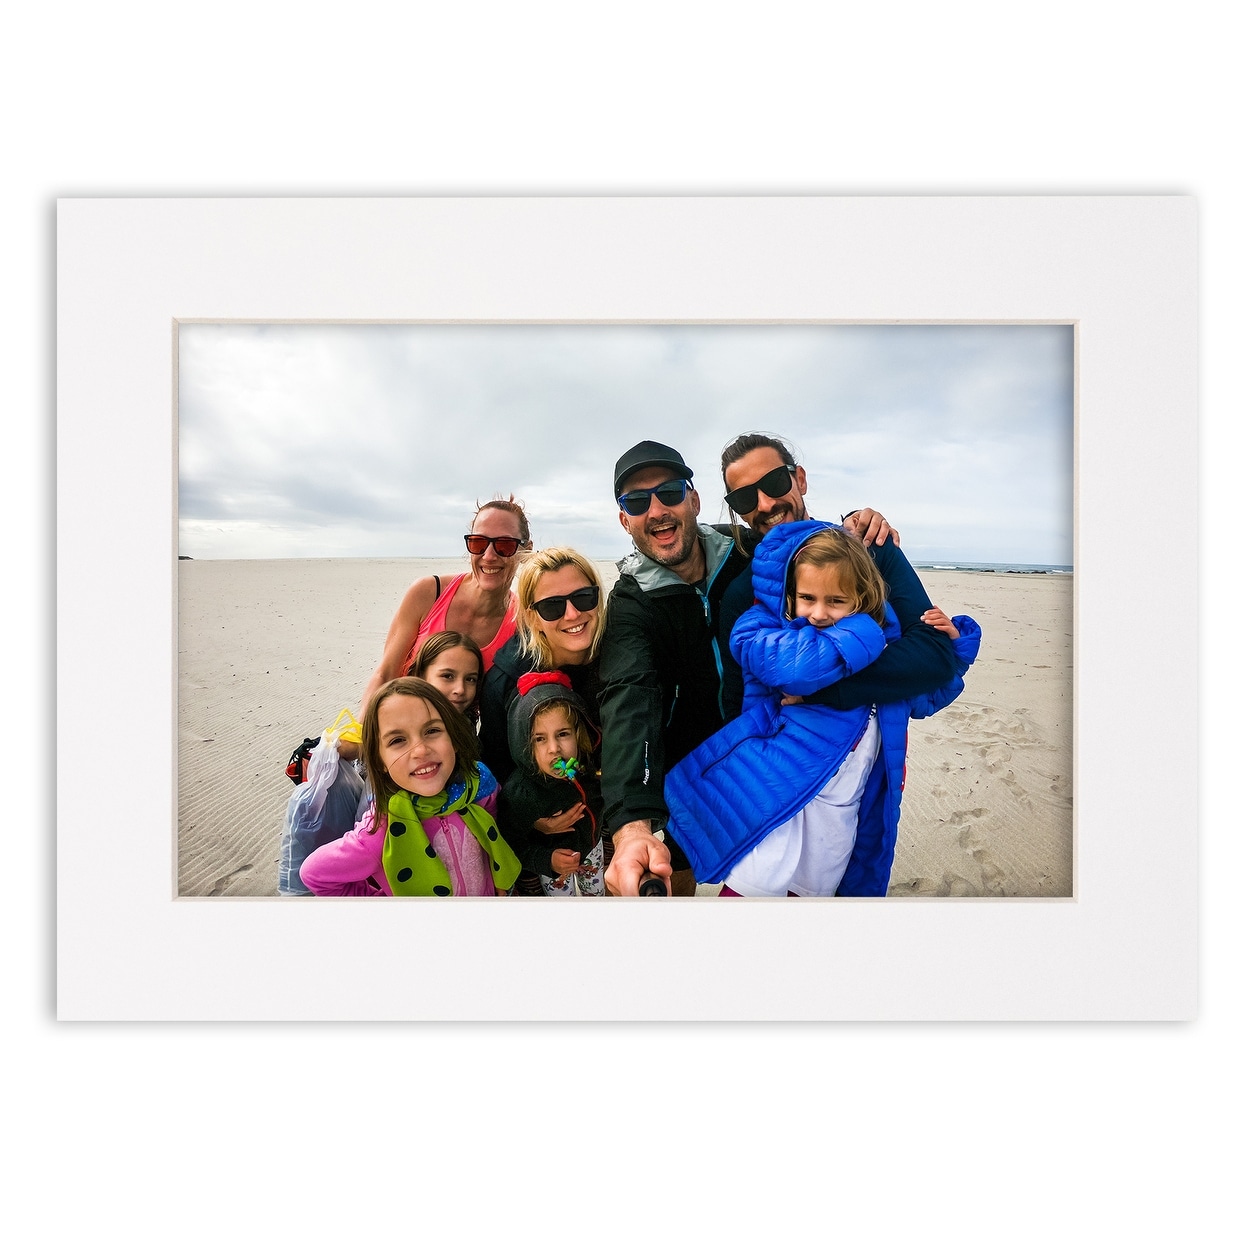 11x14 Mat for 16x20 Frame - Precut Mat Board Acid-Free White 11x14 Photo  Matte Made to Fit a 16x20 Picture Frame - Bed Bath & Beyond - 38872891